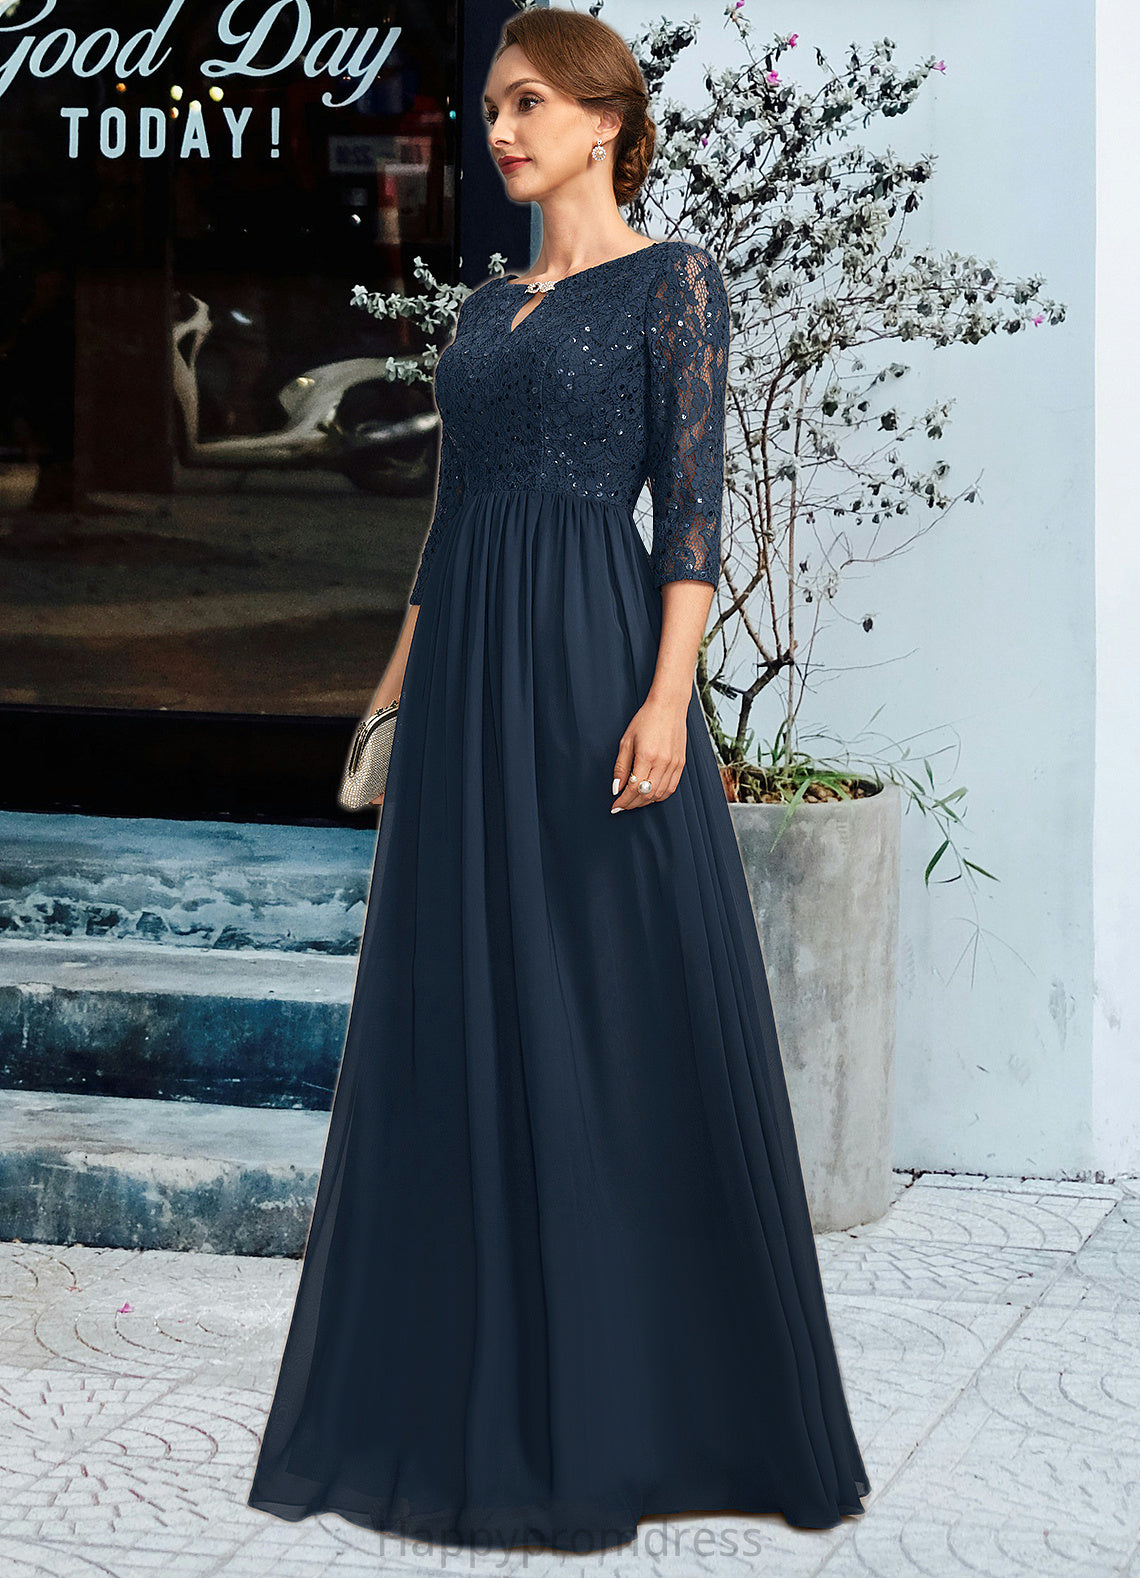 Miracle A-line Scoop Floor-Length Chiffon Lace Mother of the Bride Dress With Crystal Brooch Sequins XXSP0021961